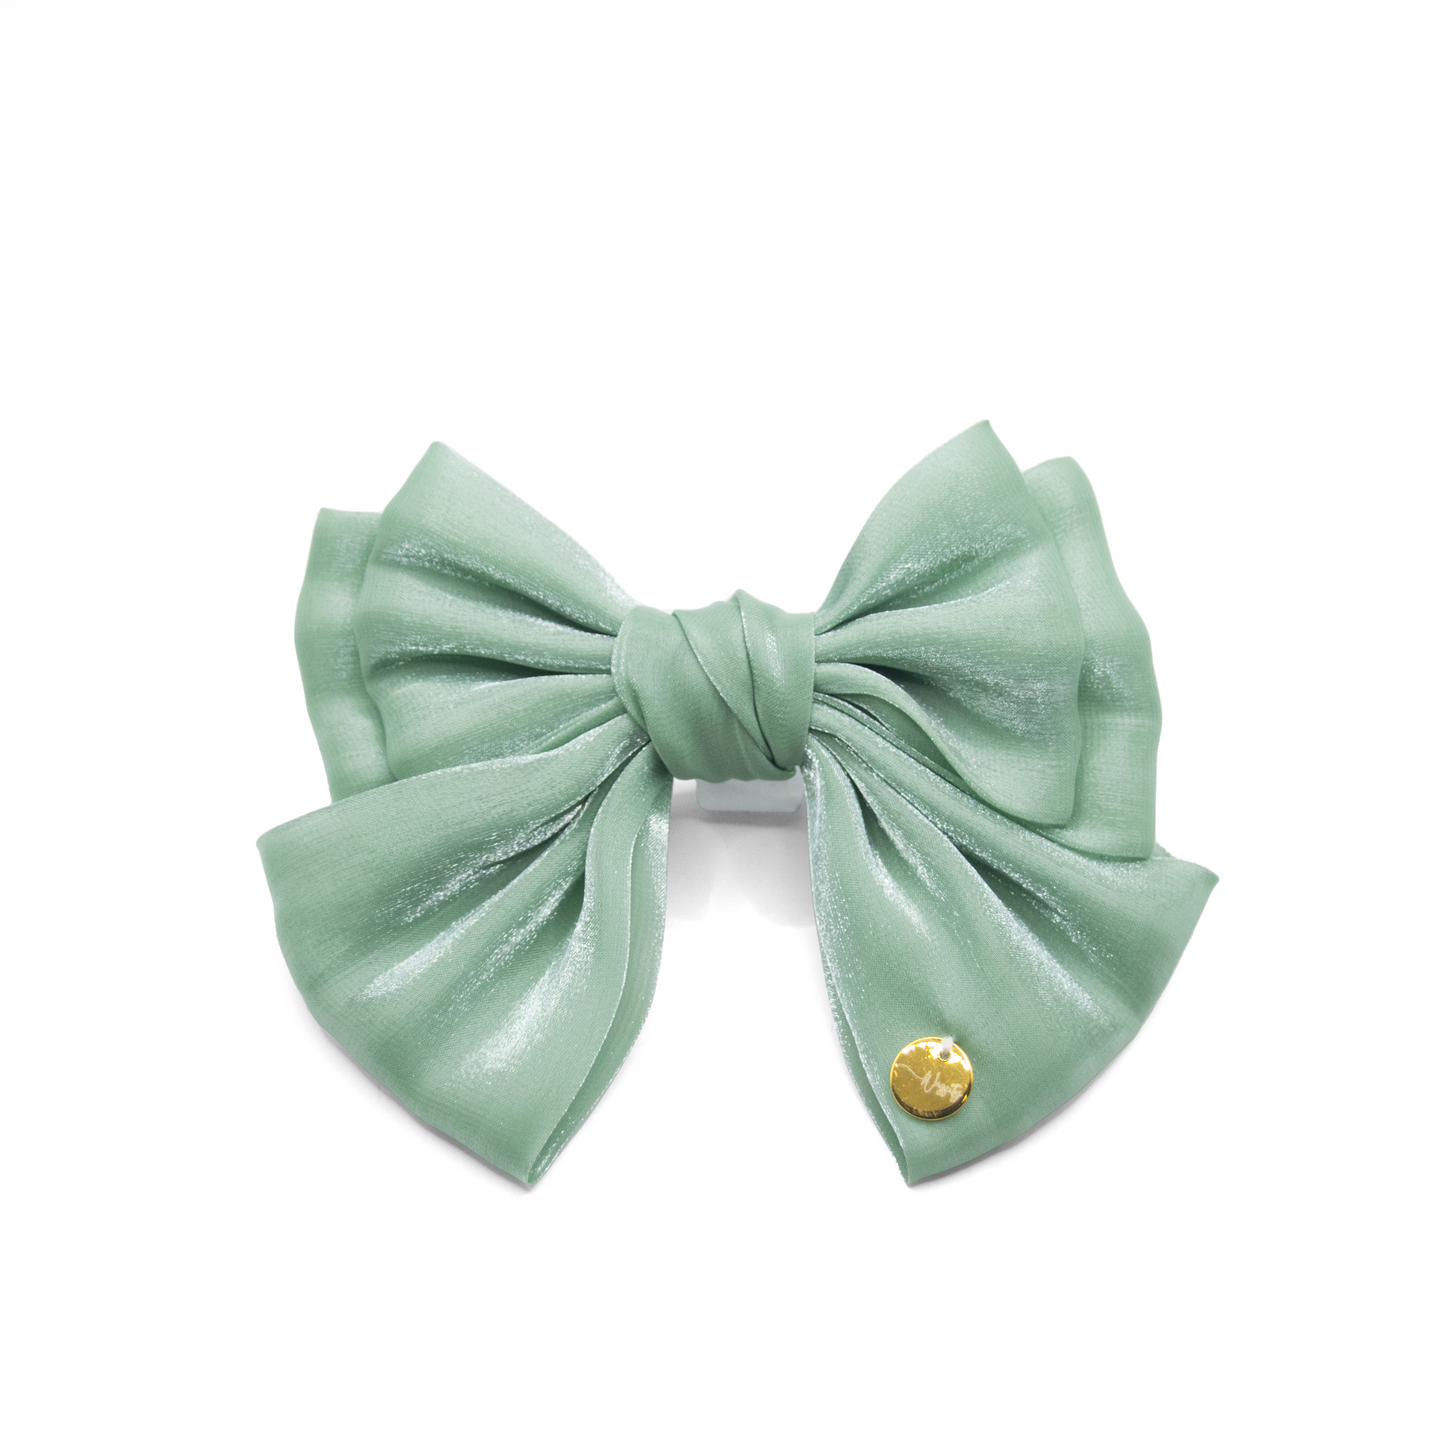 Ethereal Series - Iridescent Statement Bows